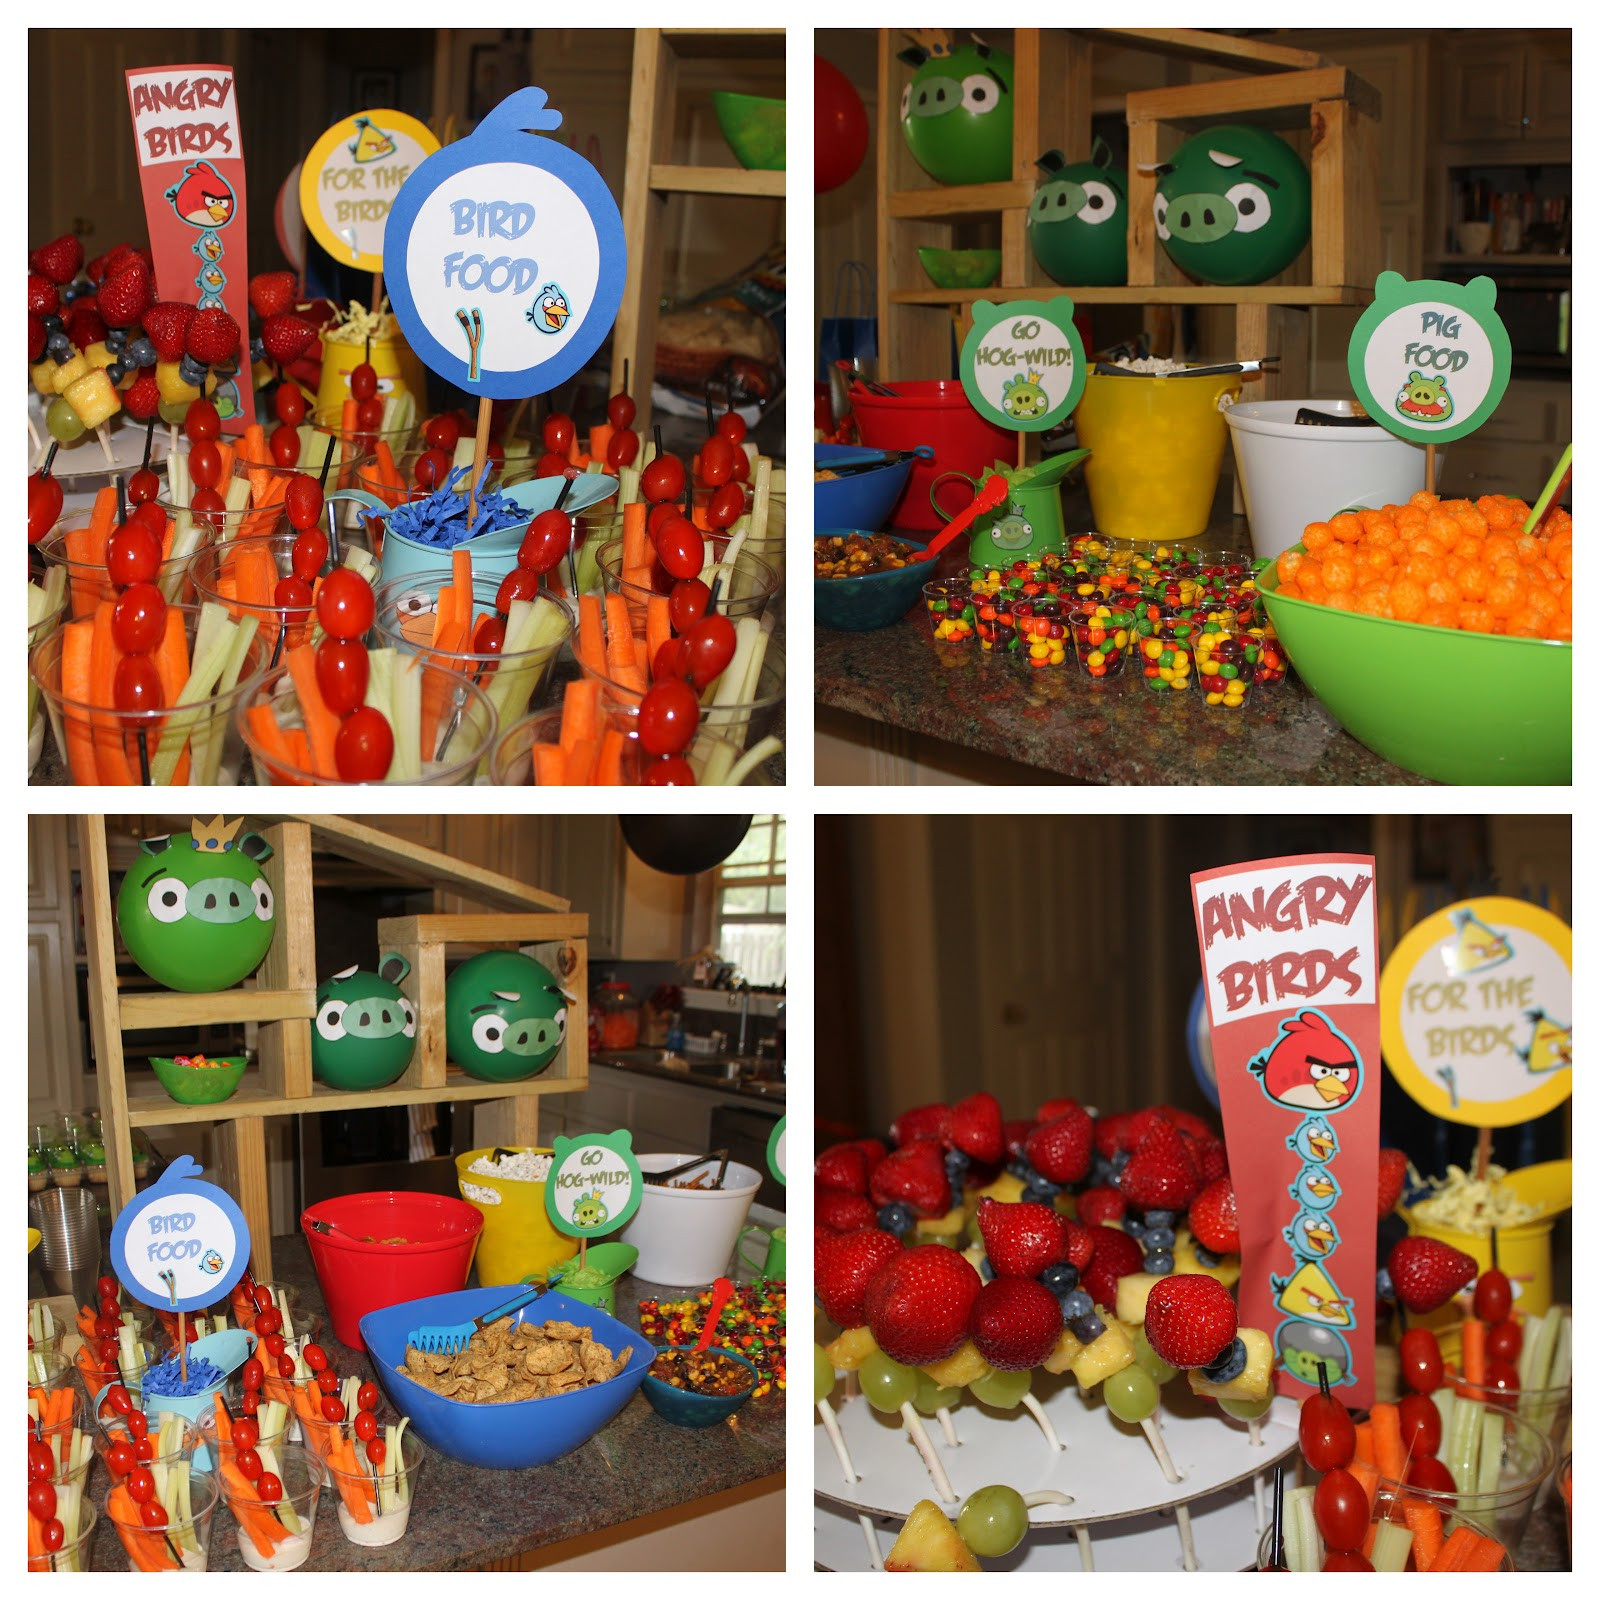 Angry Birds Party Food Ideas
 Kidspired Creations Angry Birds Birthday Party